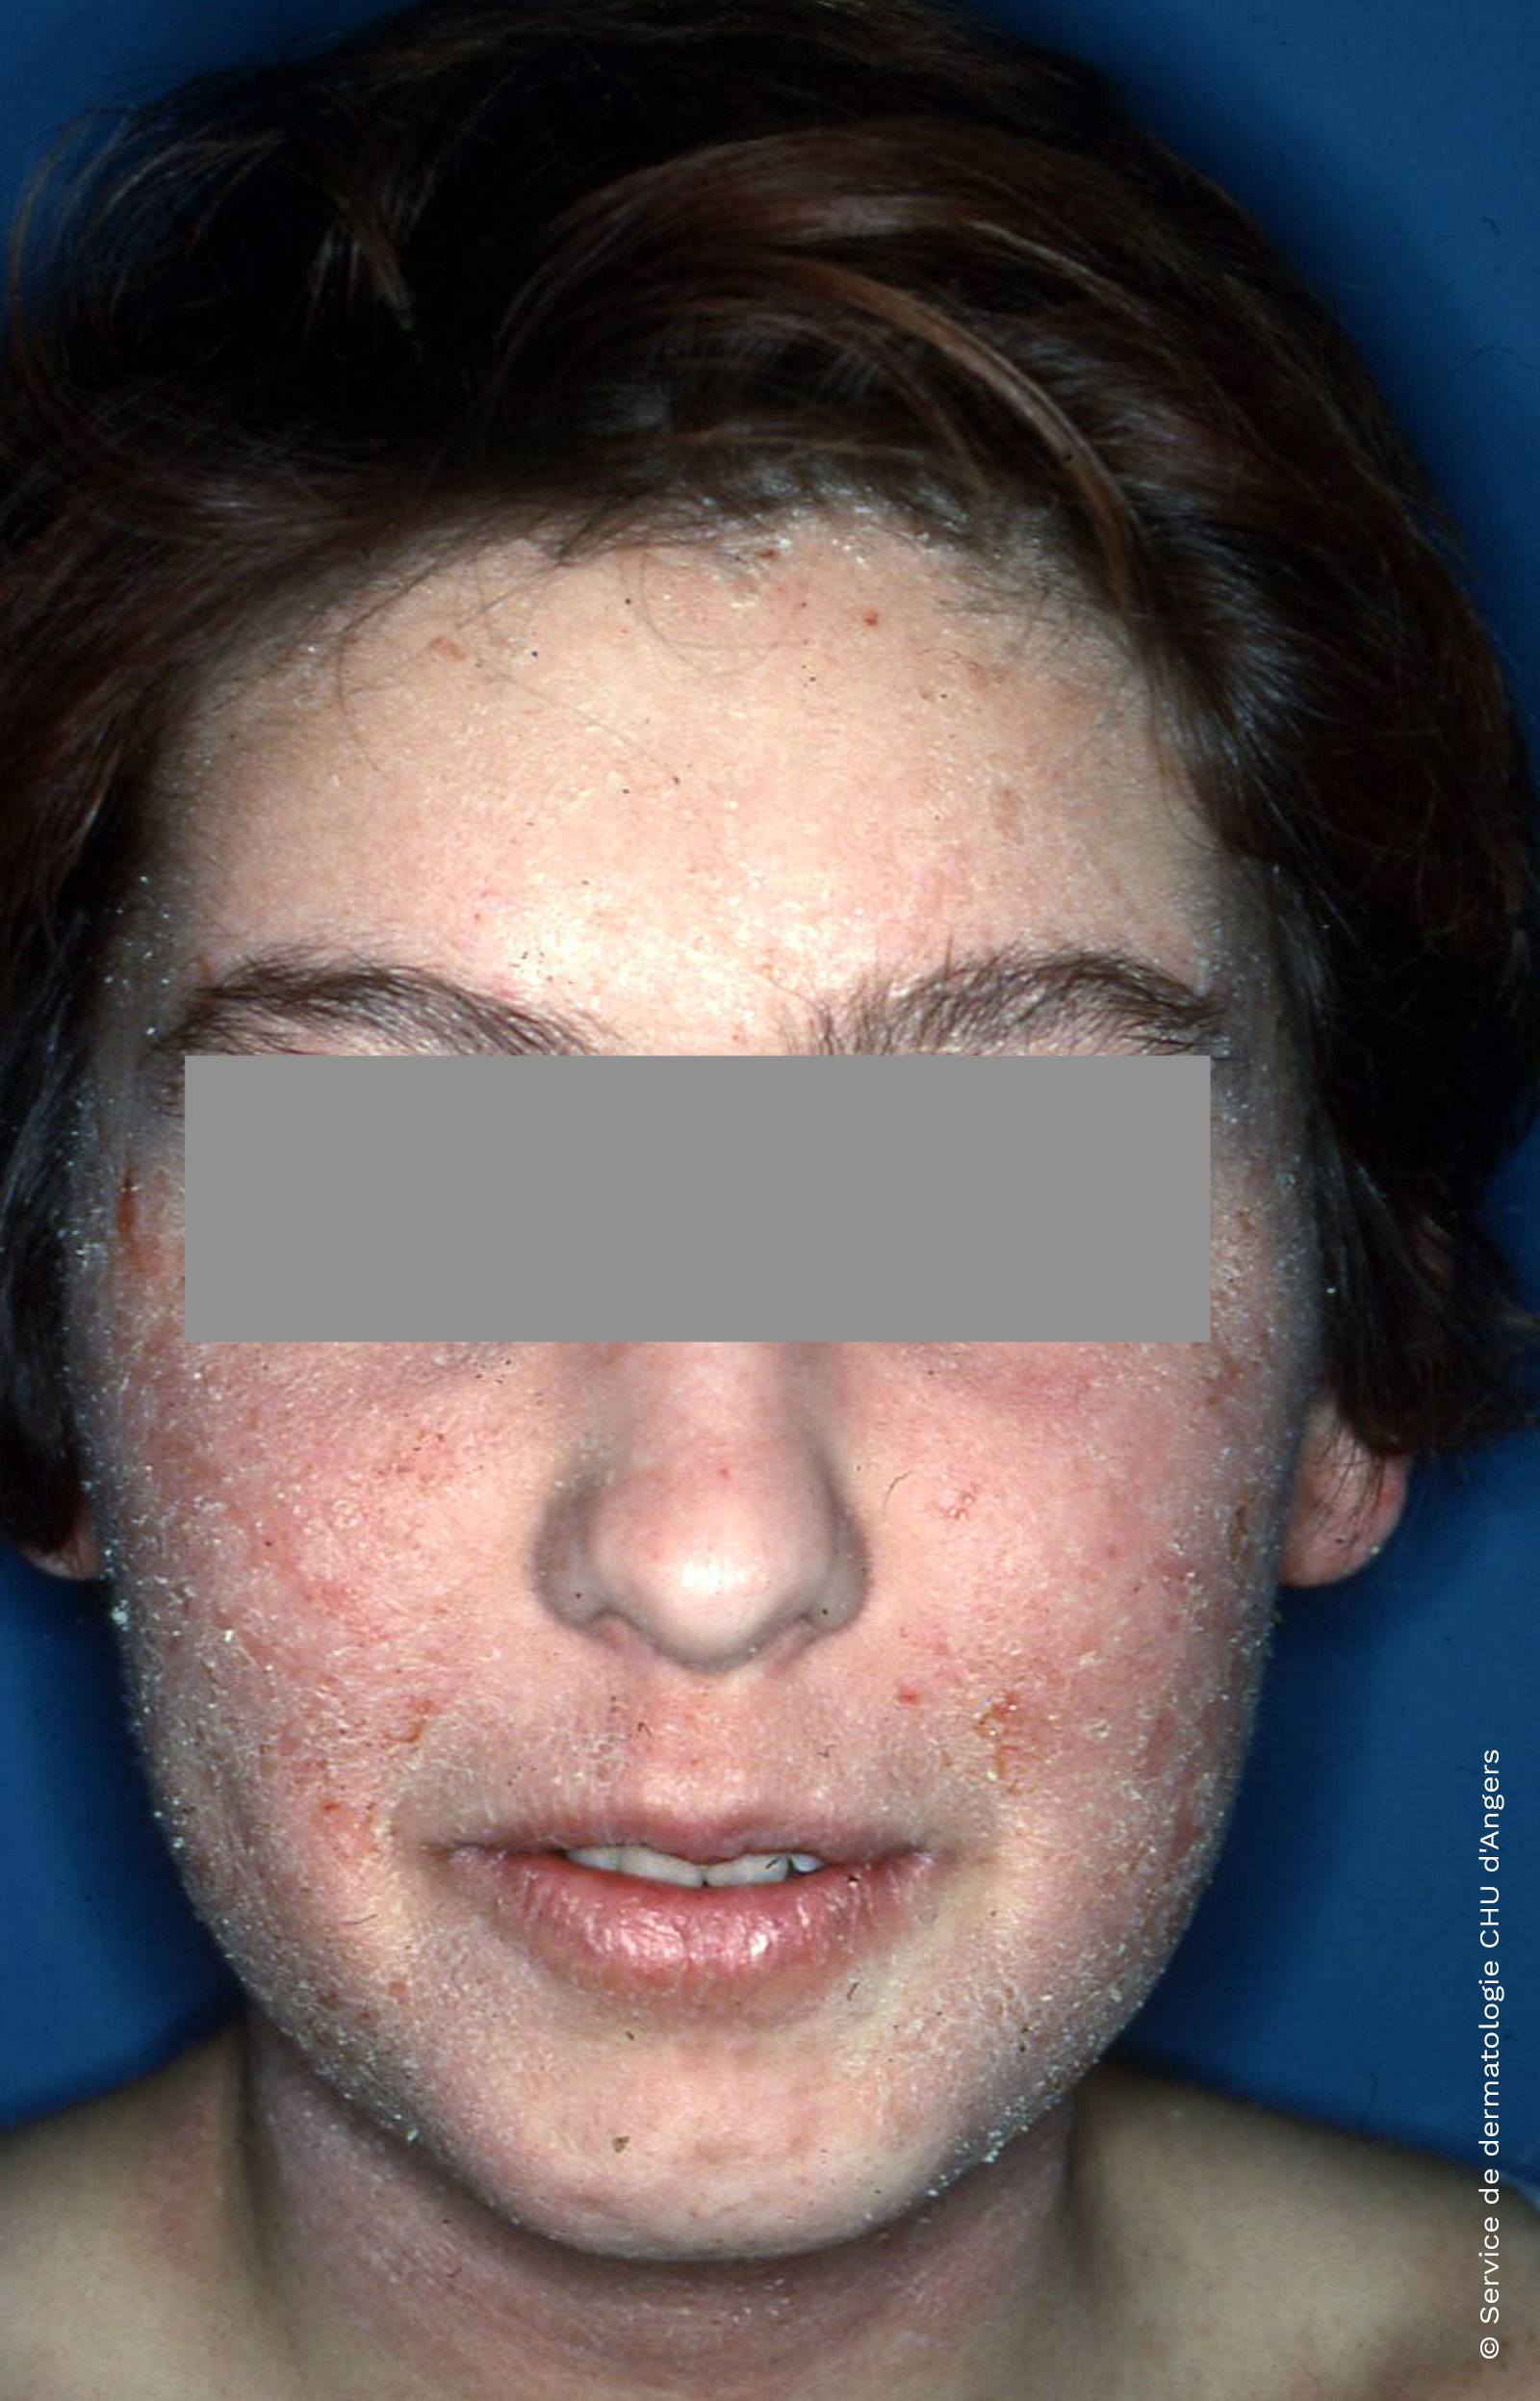 Adult atopic eczema on the face